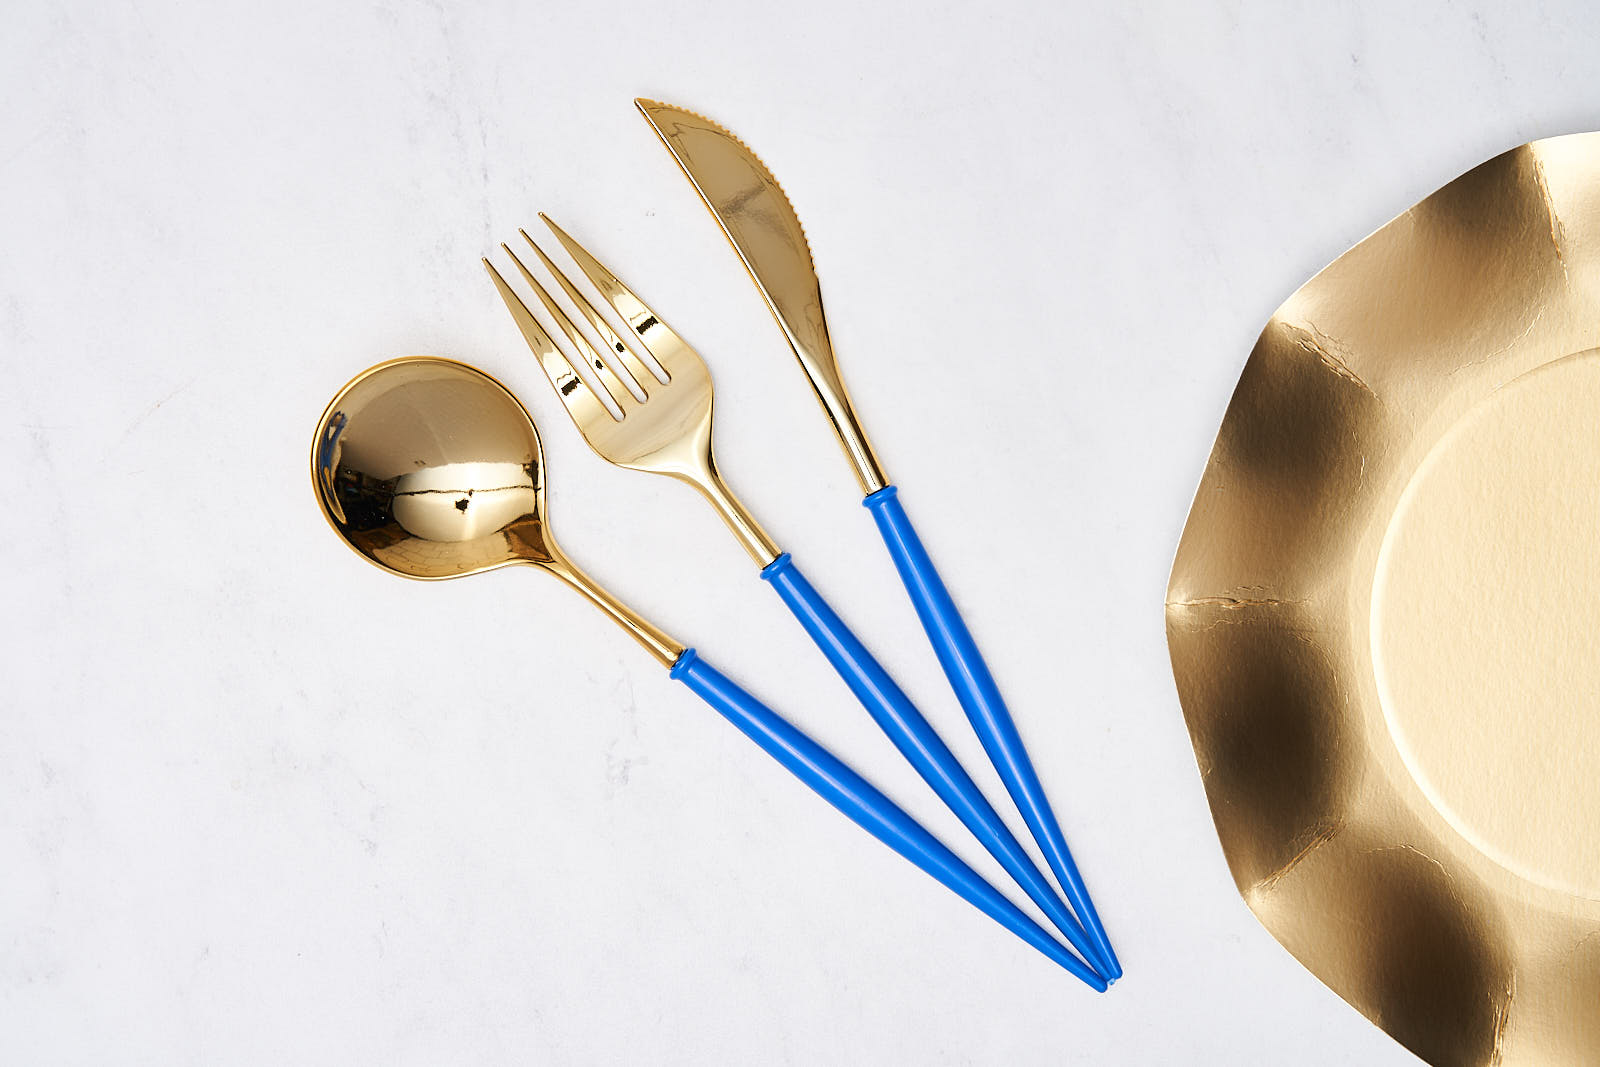 Bella Plastic Cutlery in Gold and Blue featuring a sleek modern design, including a spoon, fork, and knife, ideal for elegant events and table settings.